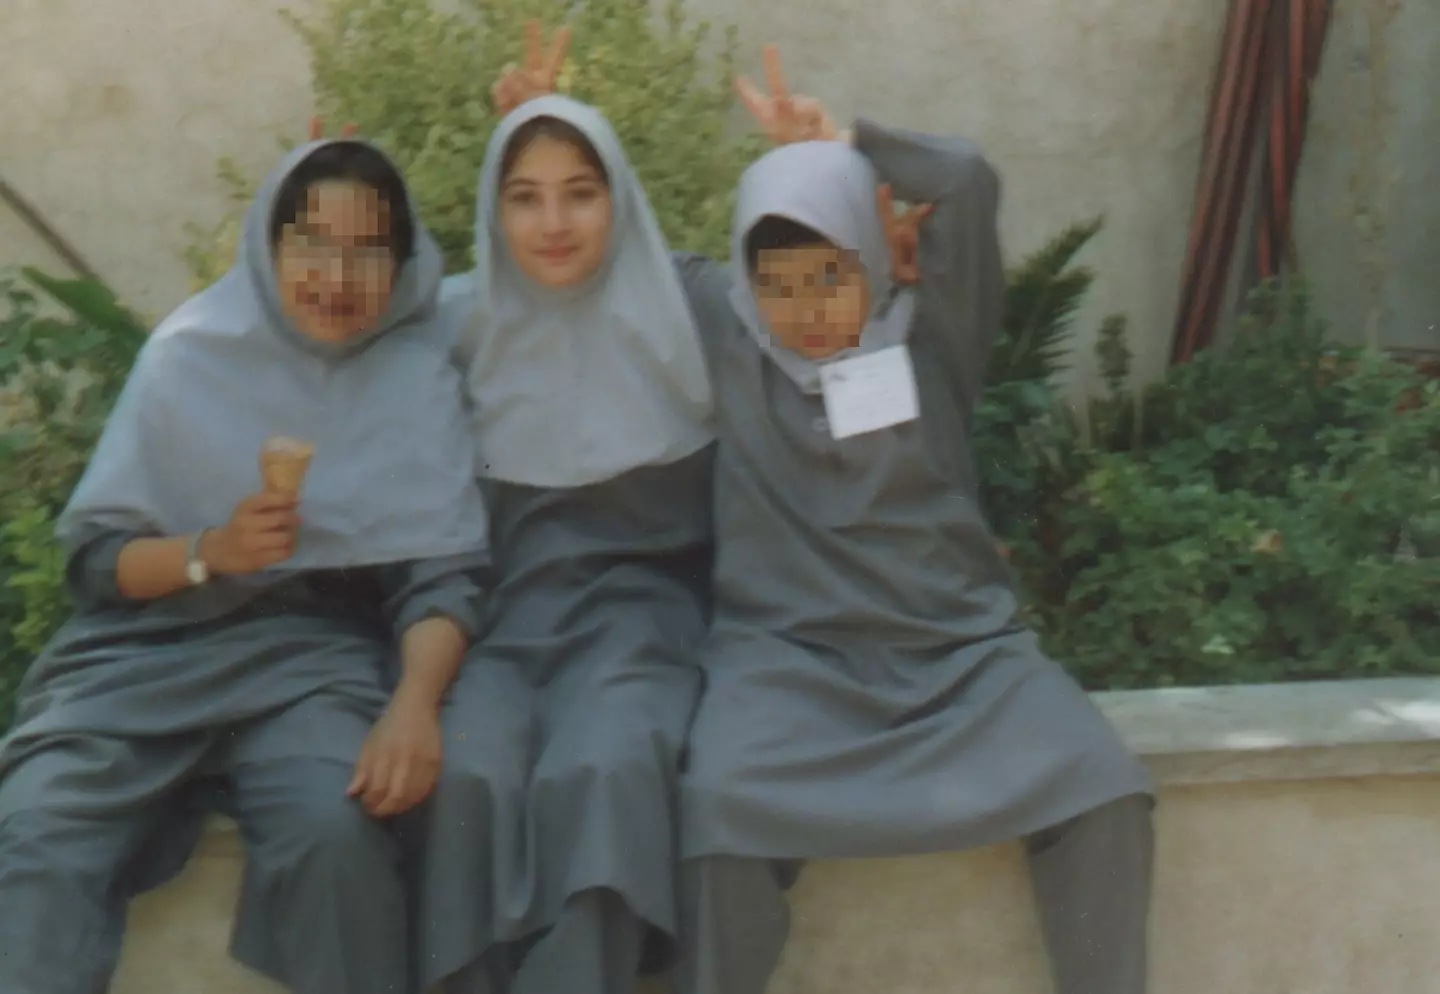 Sahar in a hijab aged 12, with classmates in Iran.